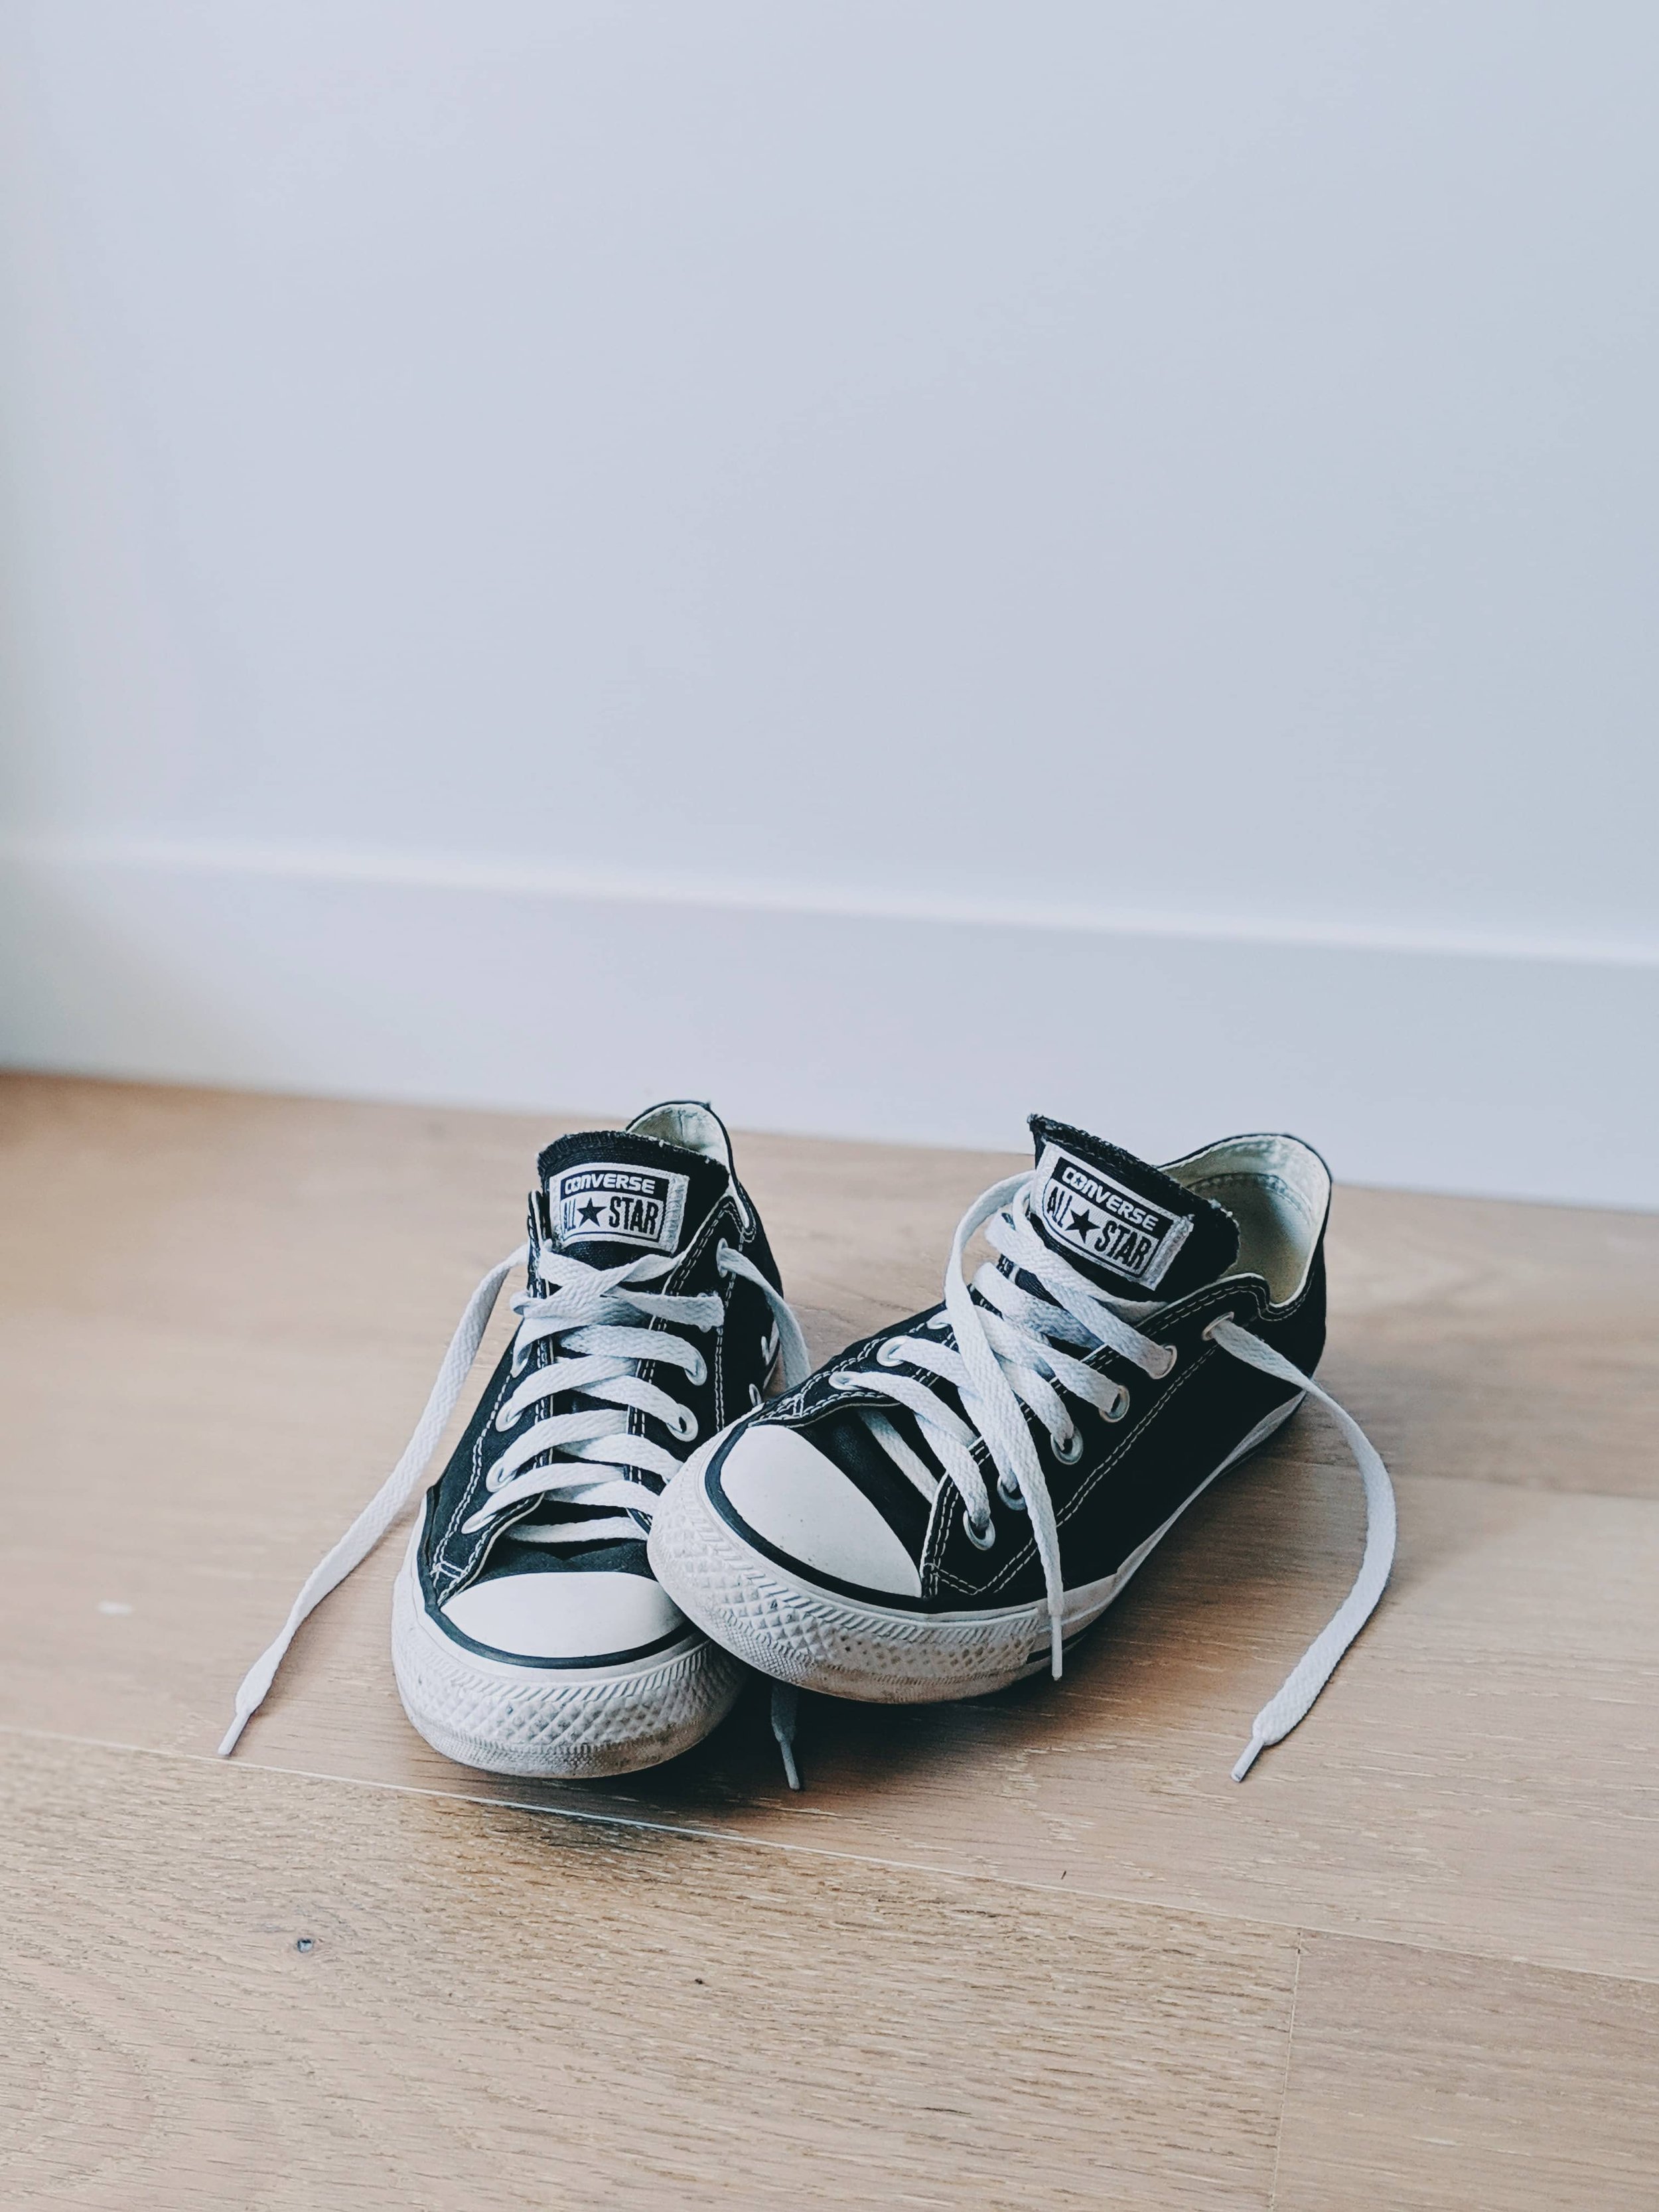 Quality Converse Shoe Repairs Delivered to Your Door